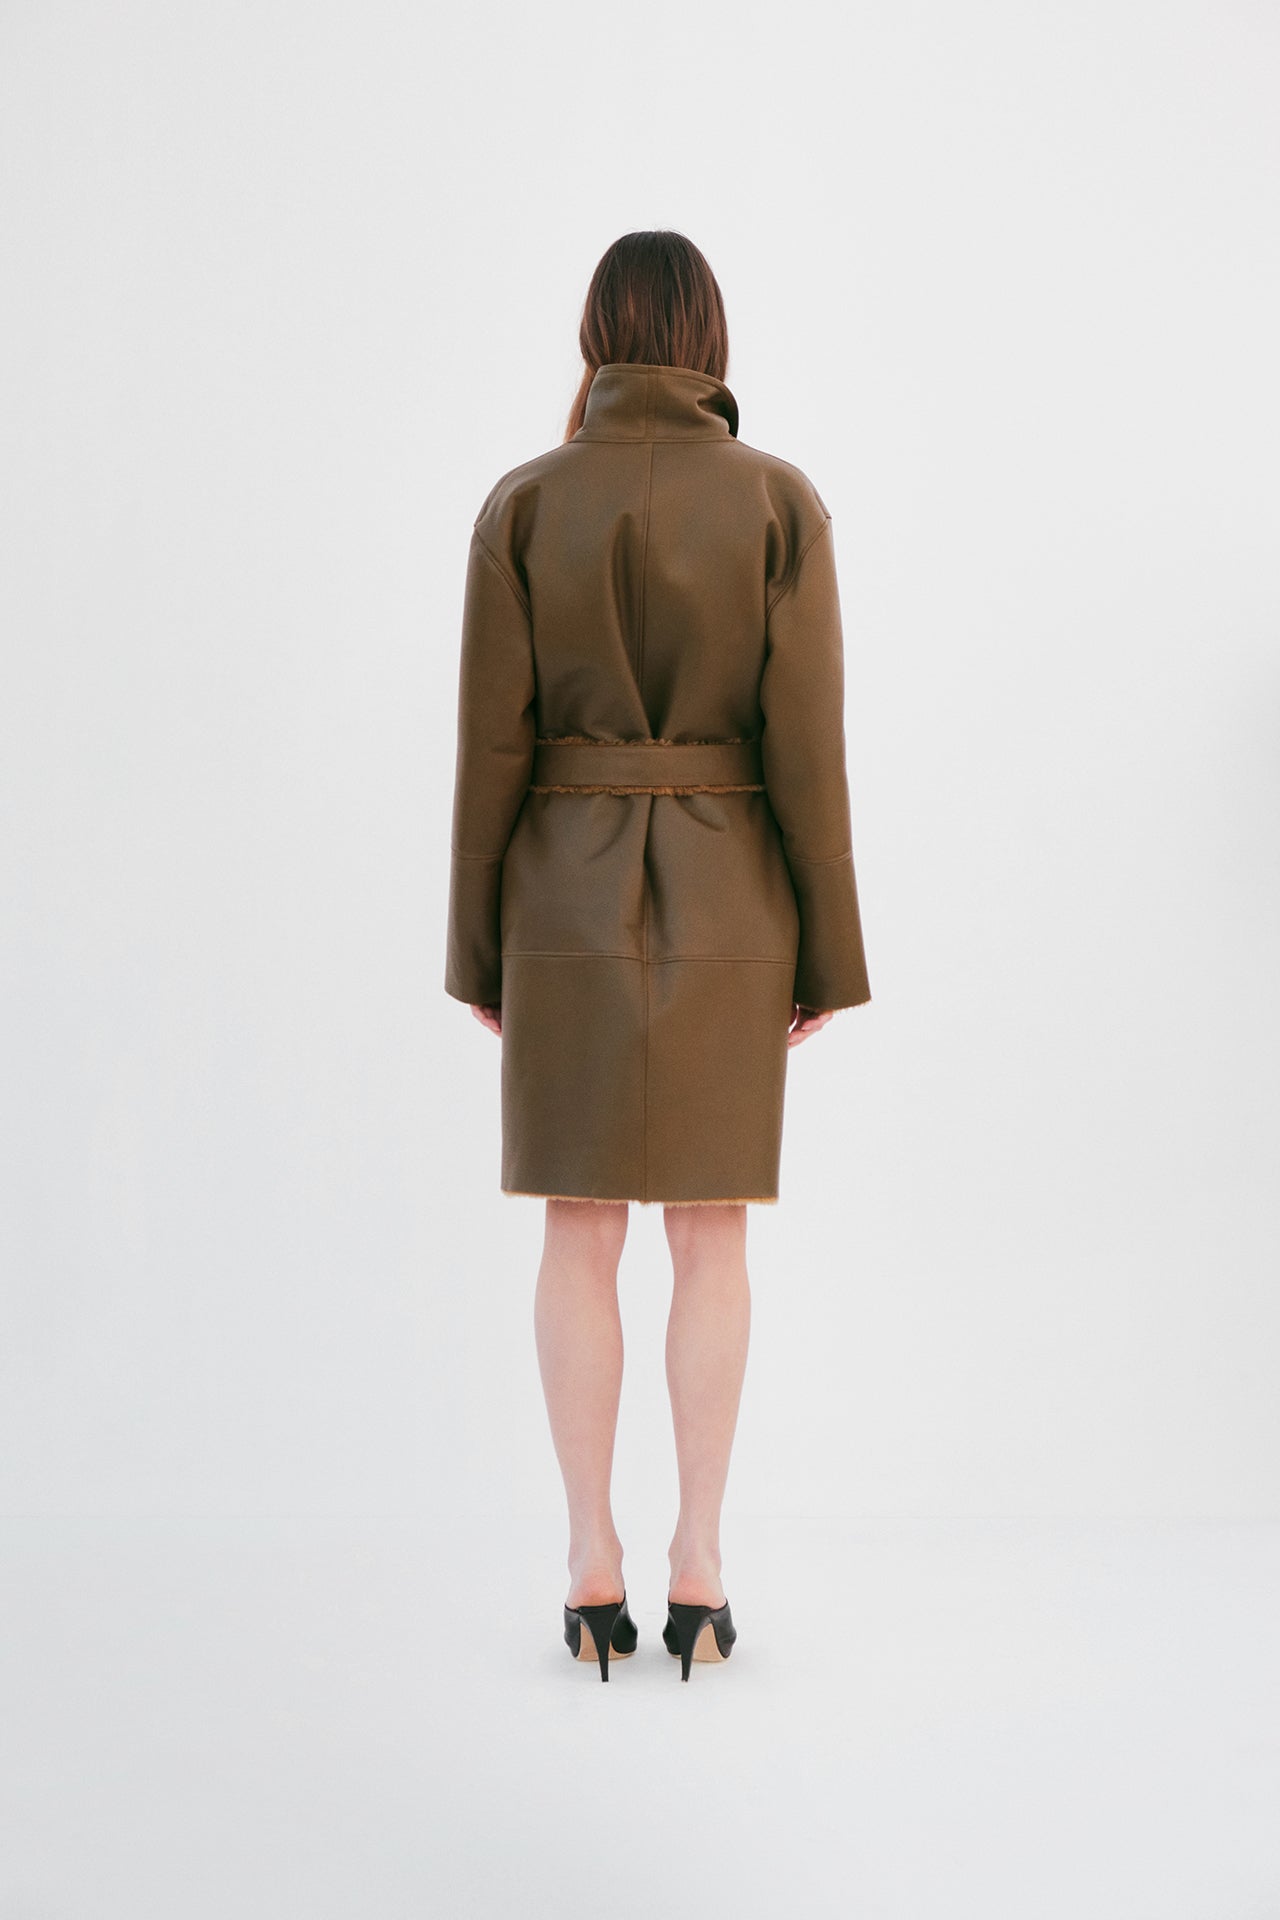 "Robe" Shearling Coat - Olive - Common Leisure 